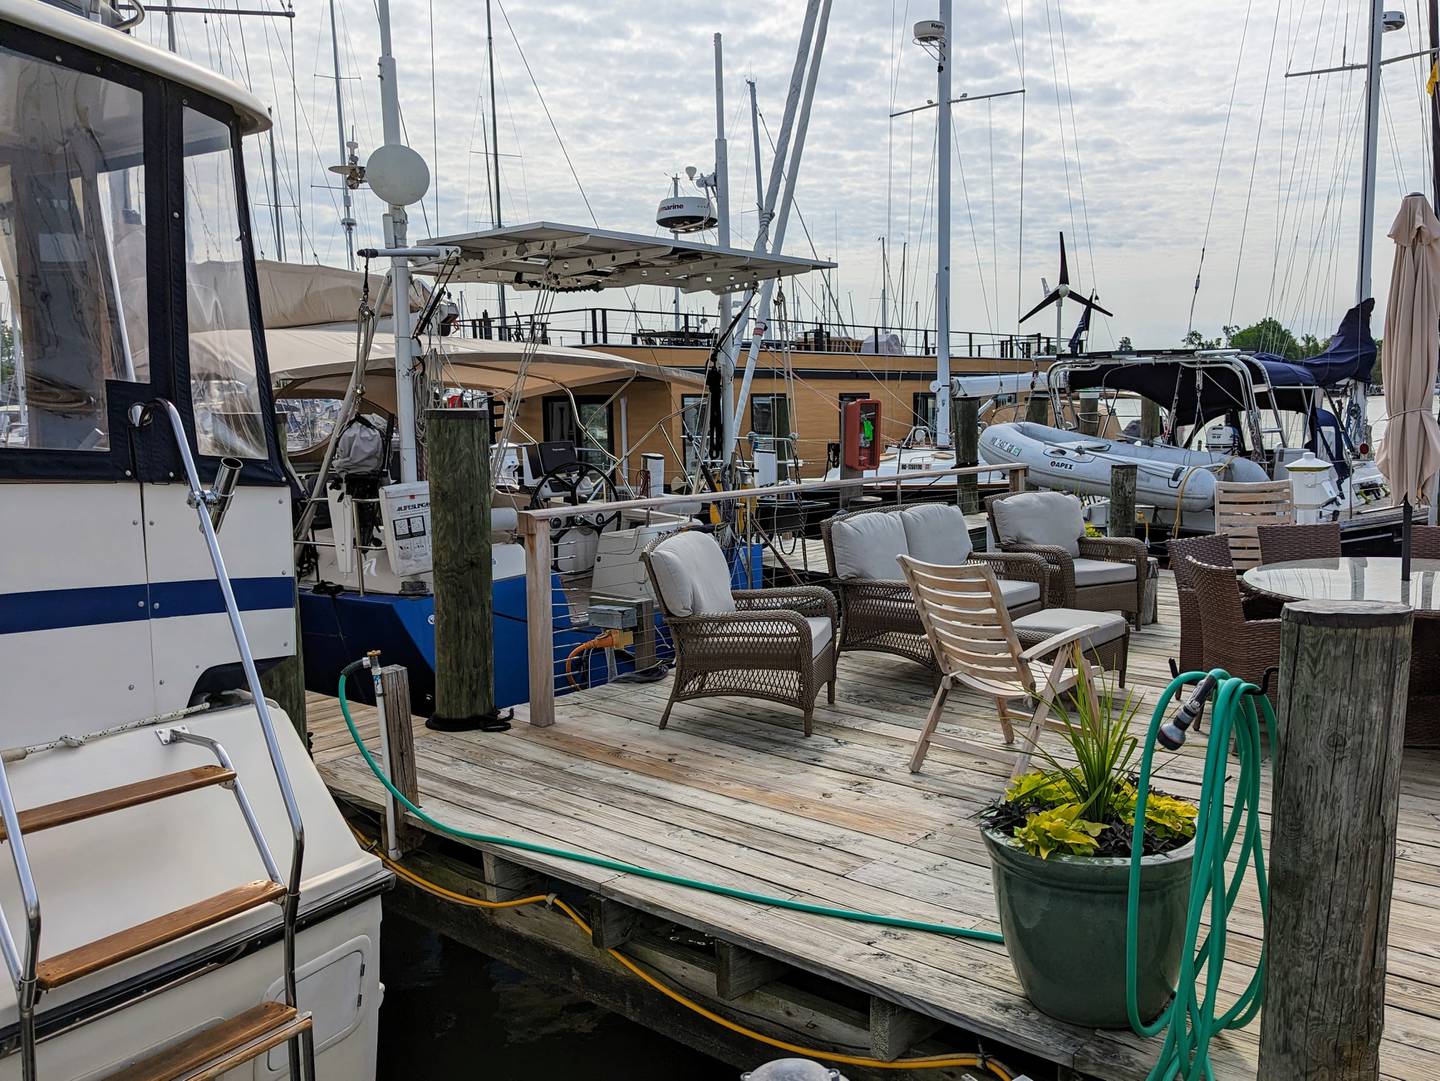 Flohom 1 |Bay Escape blends into the surroundings at Butler's Marina in Annapolis, sort of the boat of getting the experience of waterfront living without having to buy.